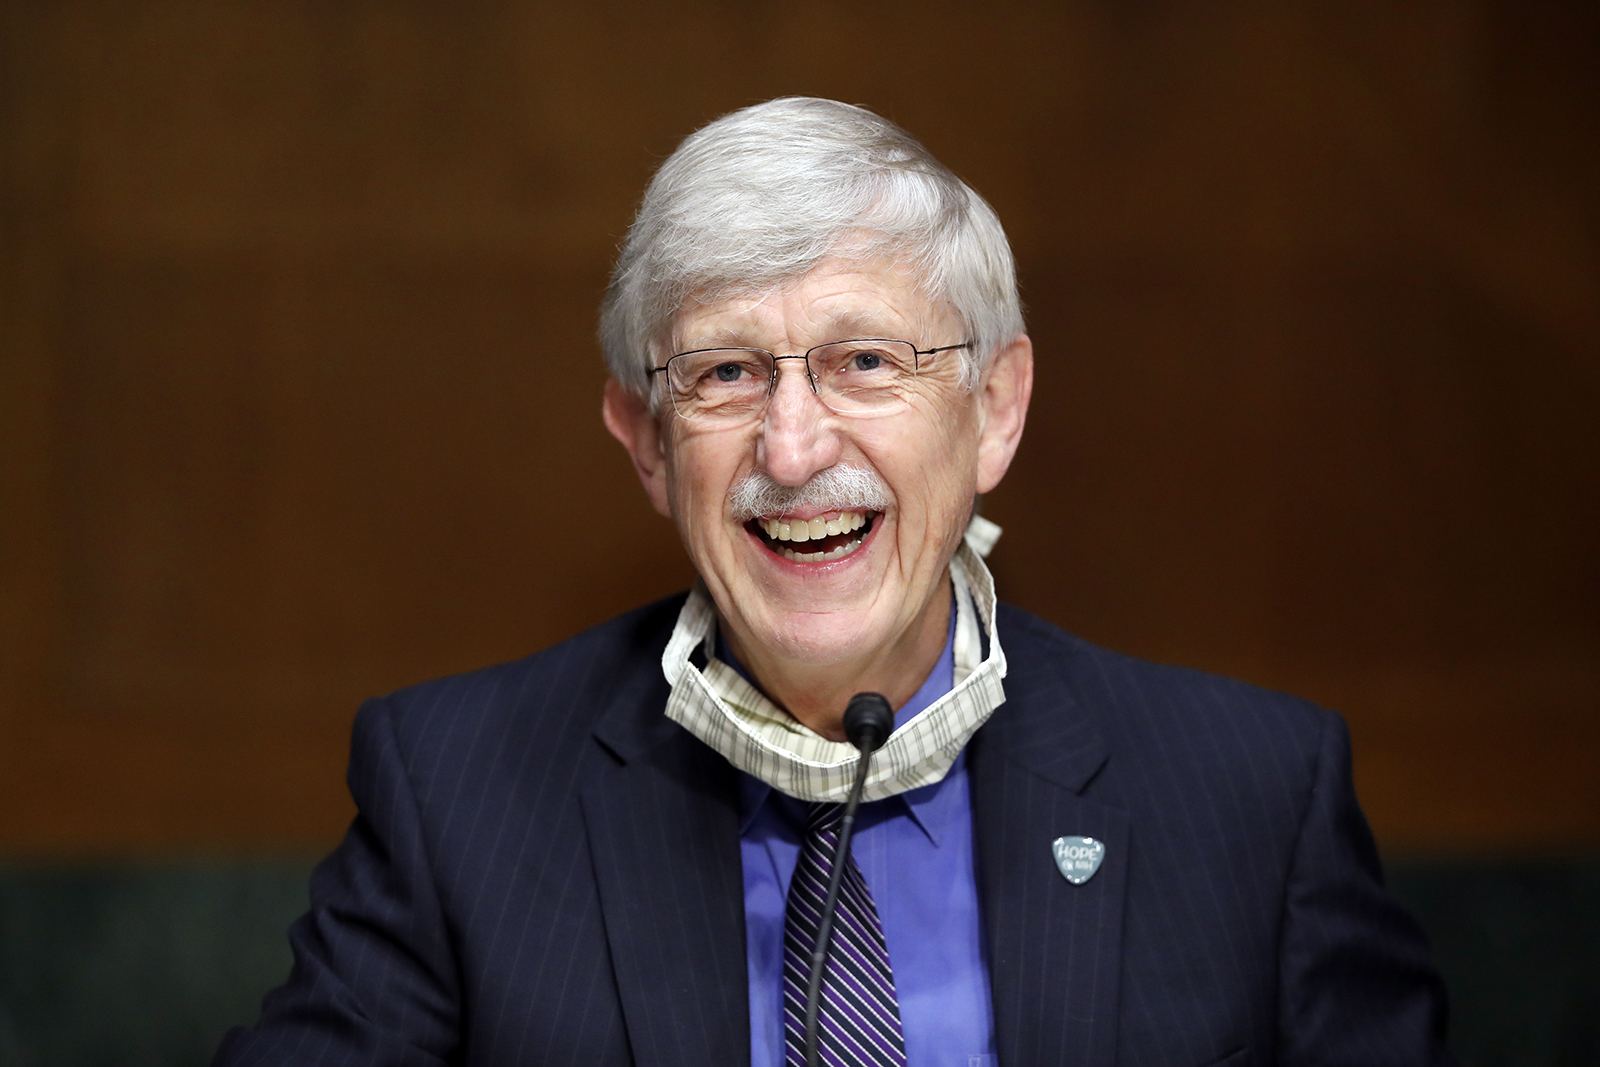 National Institutes of Health Director Dr. Francis Collins speaks during a Senate Health, Education, Labor and Pensions Committee hearing on new coronavirus tests on Capitol Hill in Washington on May 7, 2020. (AP Photo/Andrew Harnik, Pool)